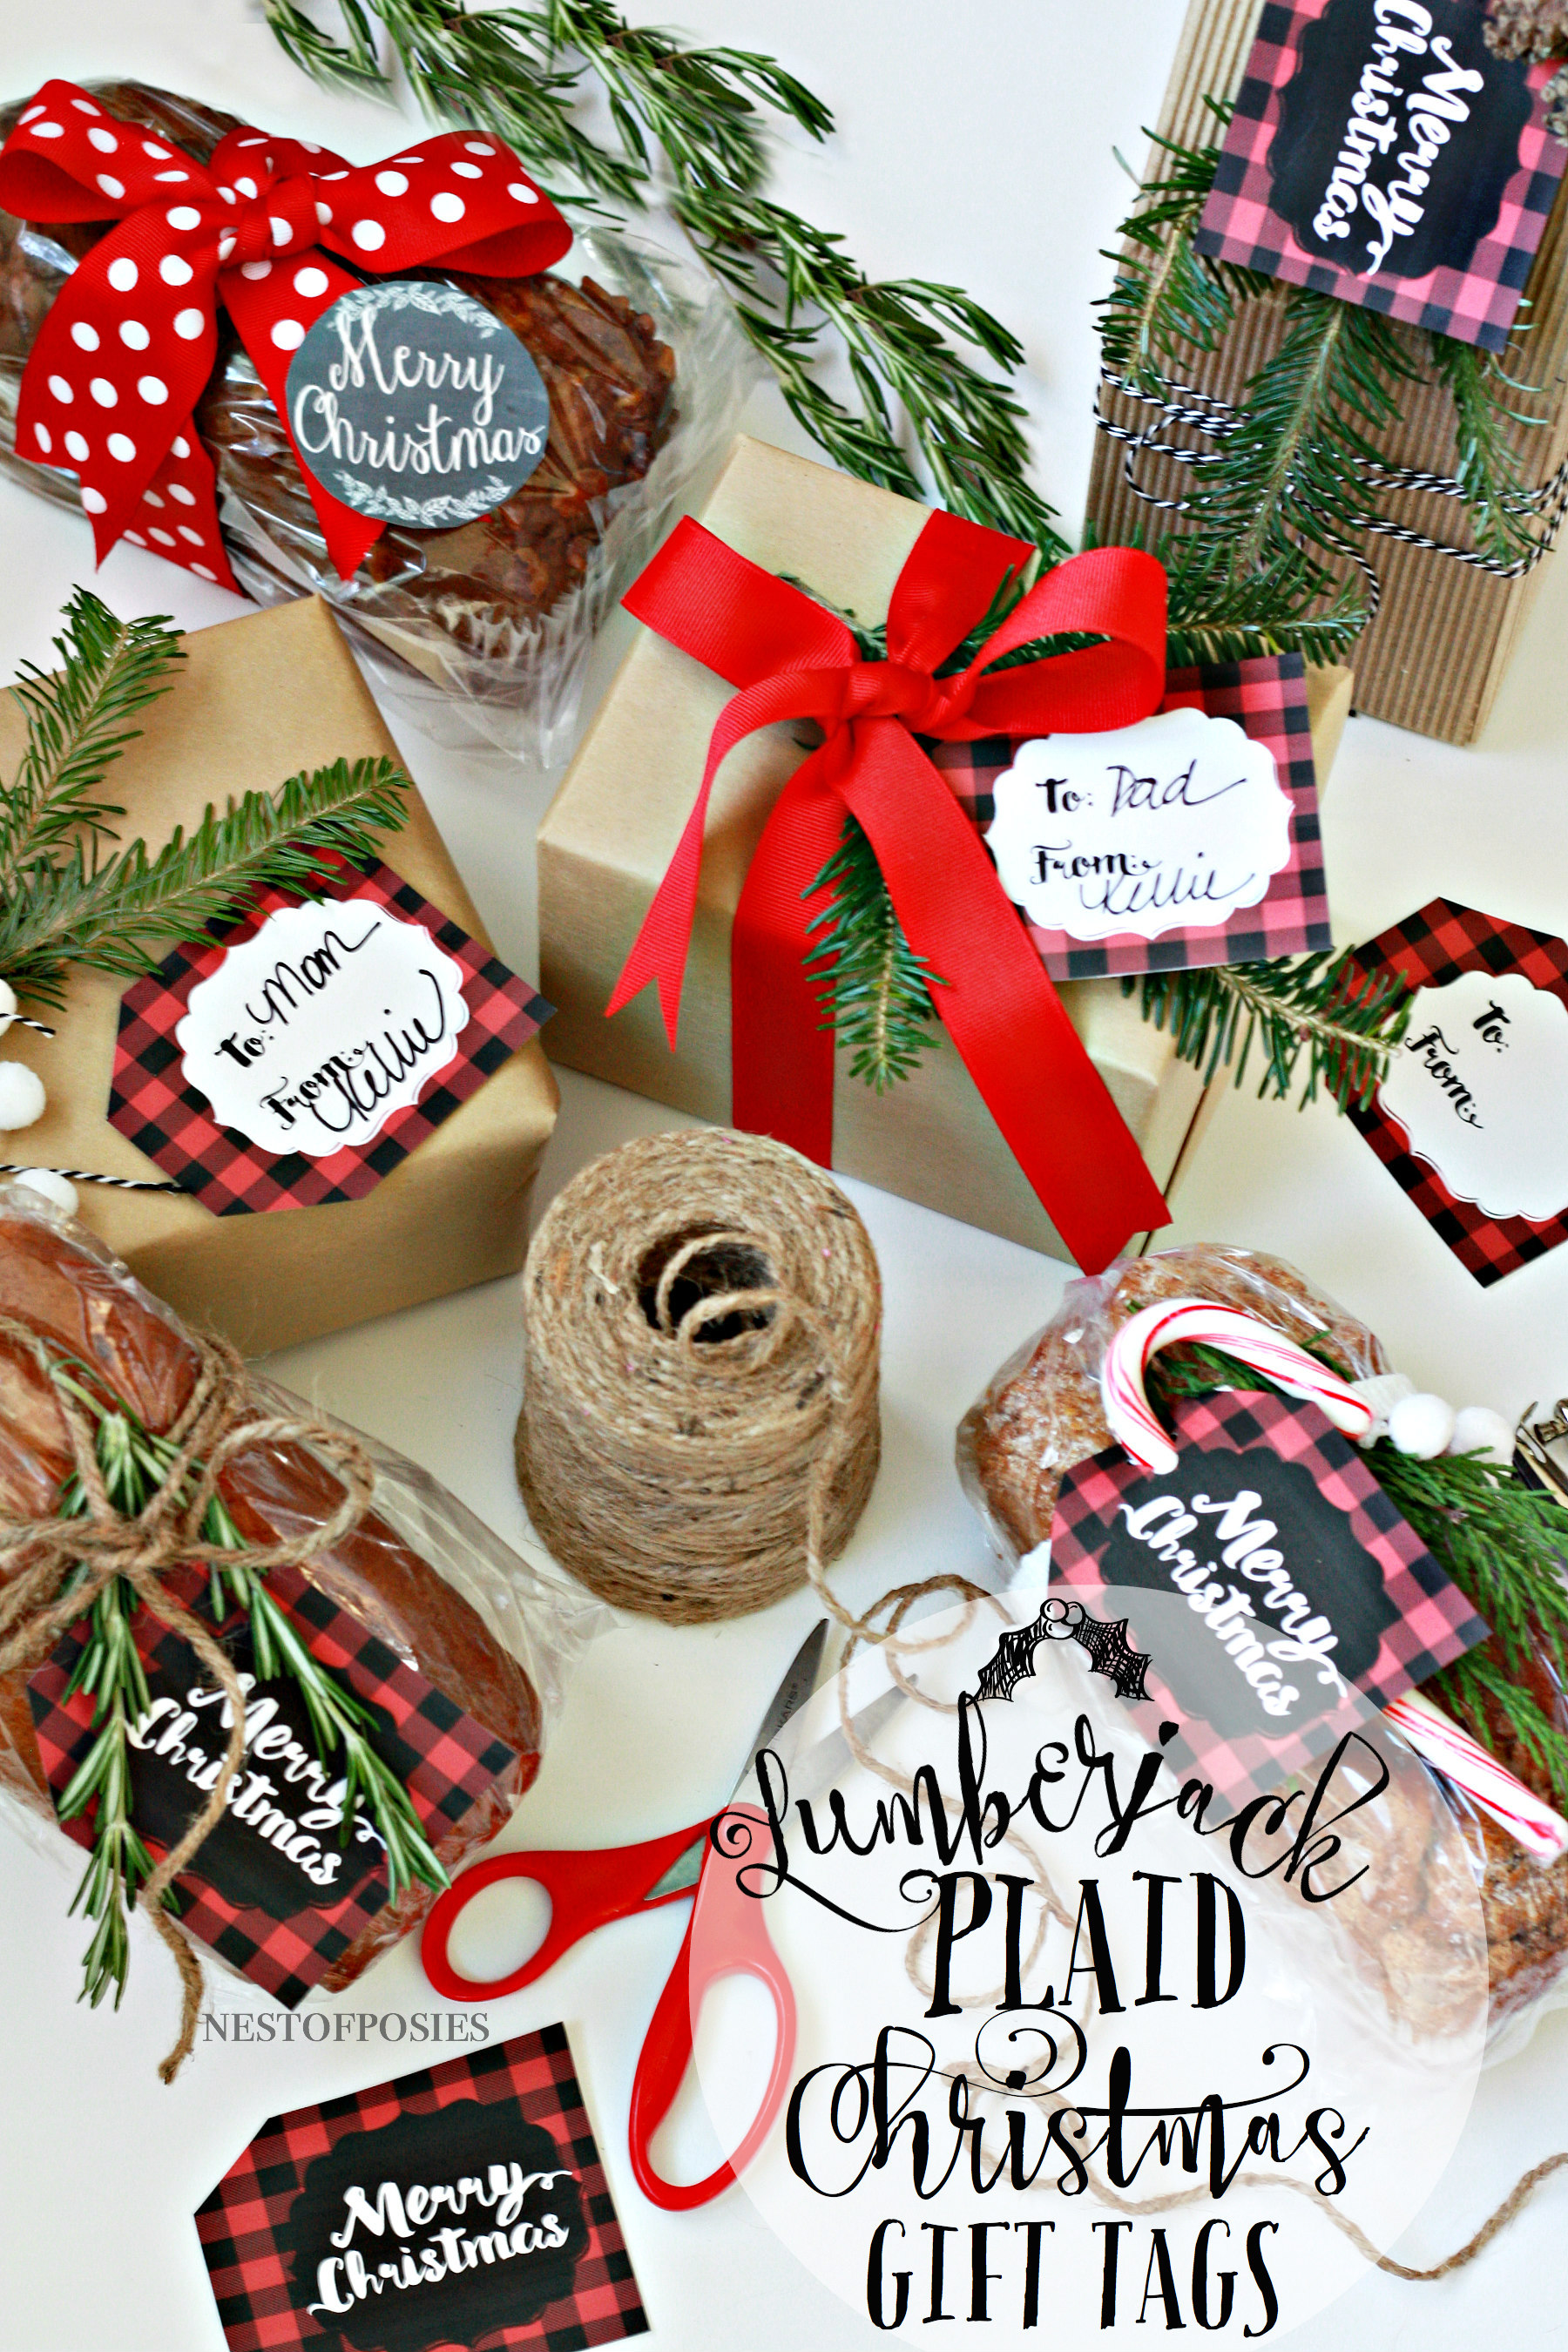 https://www.nestofposies-blog.com/wp-content/uploads/2015/11/Christmas-Gift-Tags-for-baked-goods-and-gifts-in-Lumberjack-Plaid..jpg